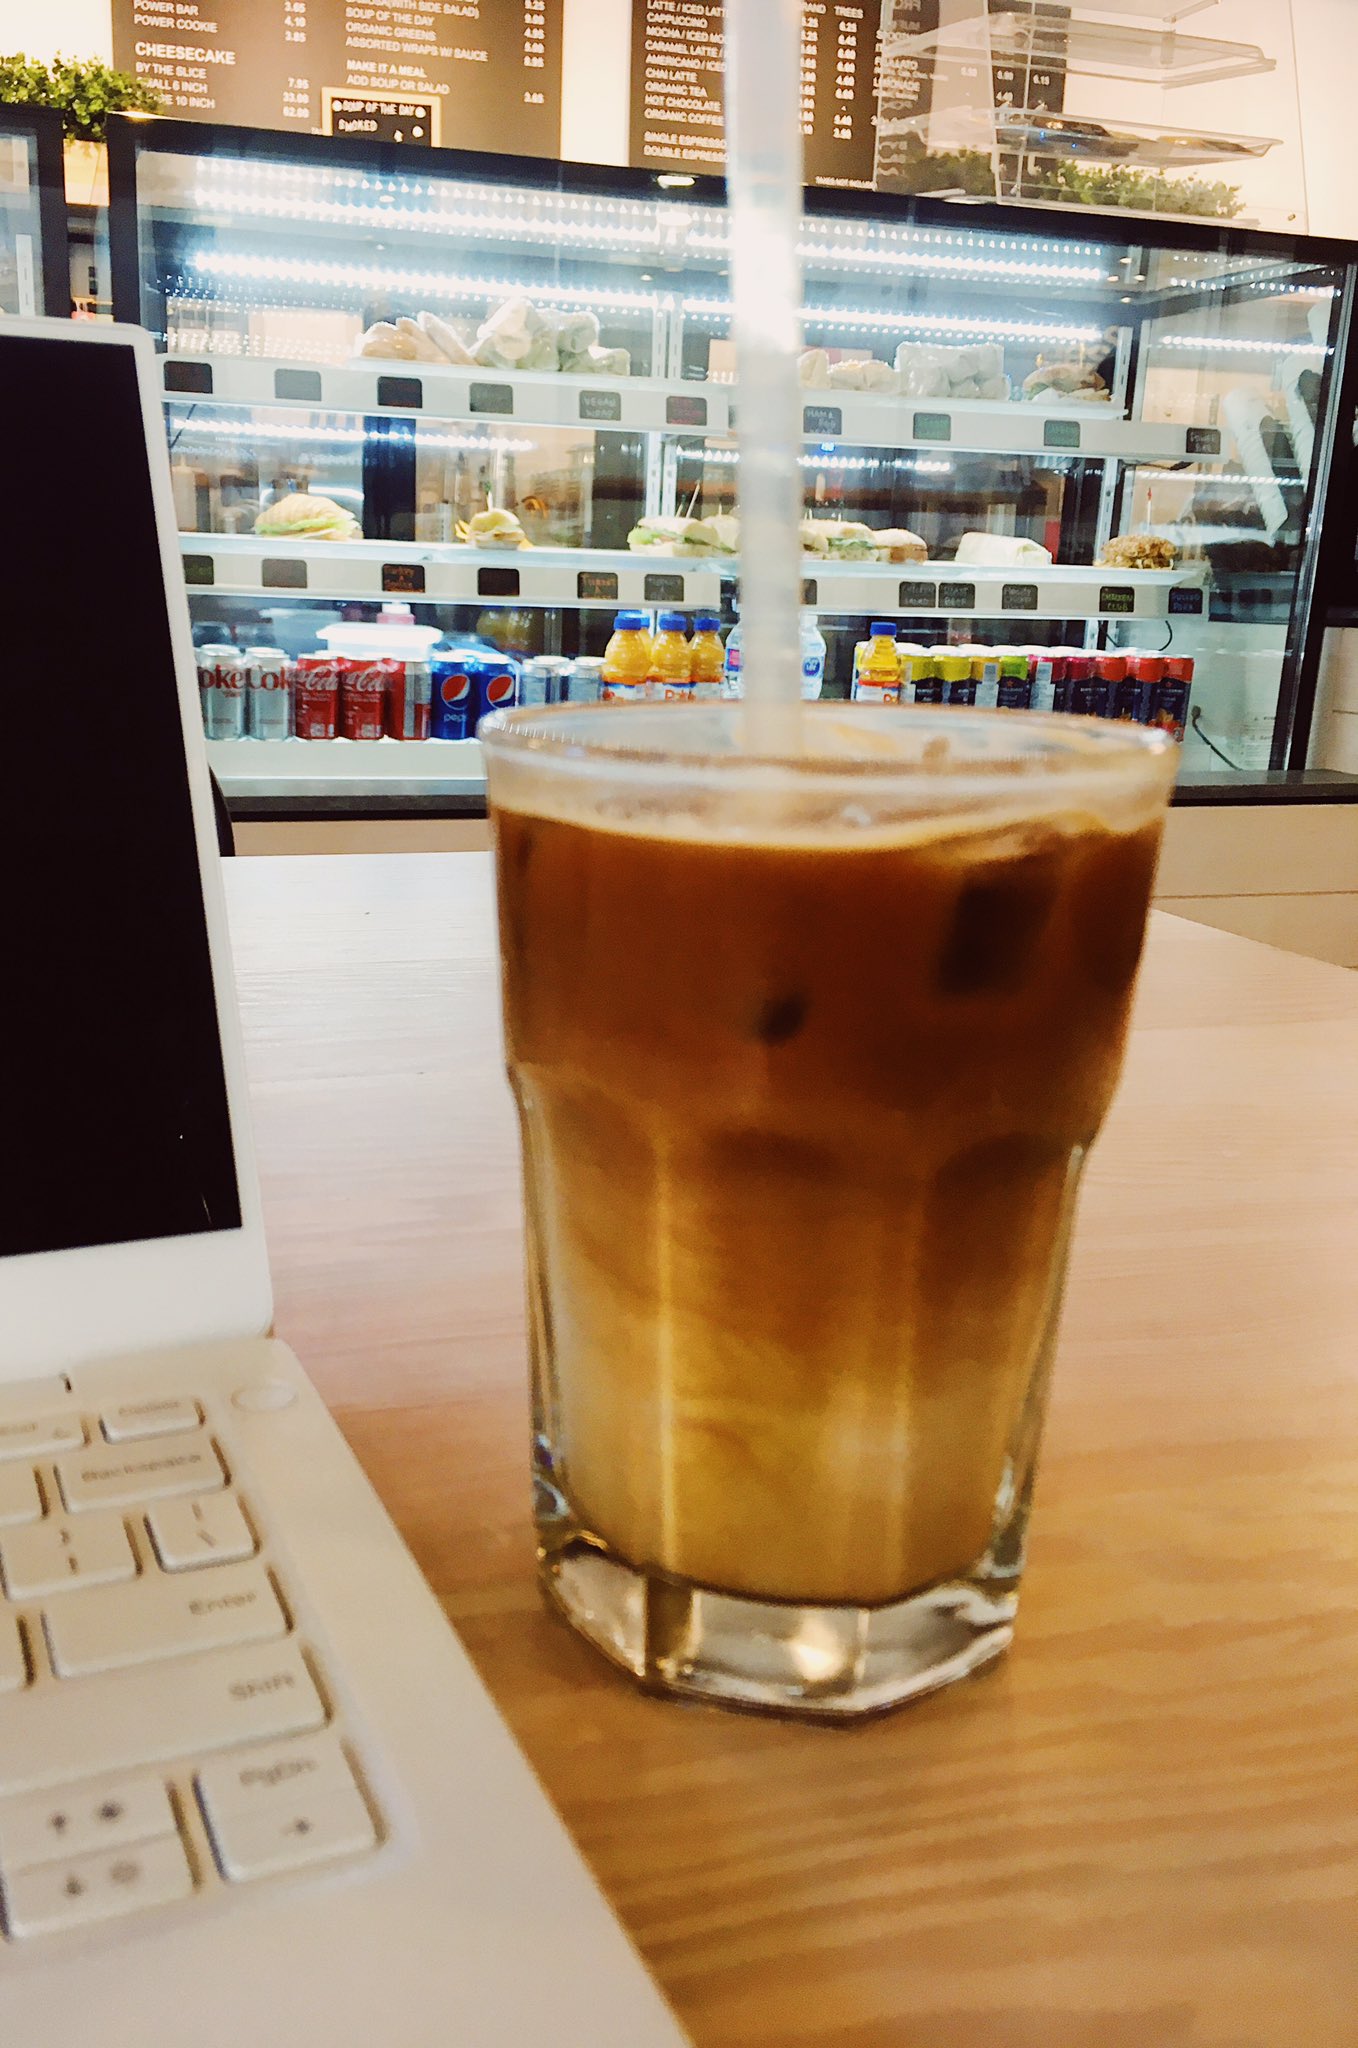 A slightly blurry iced latte next to my laptop at a cafe.